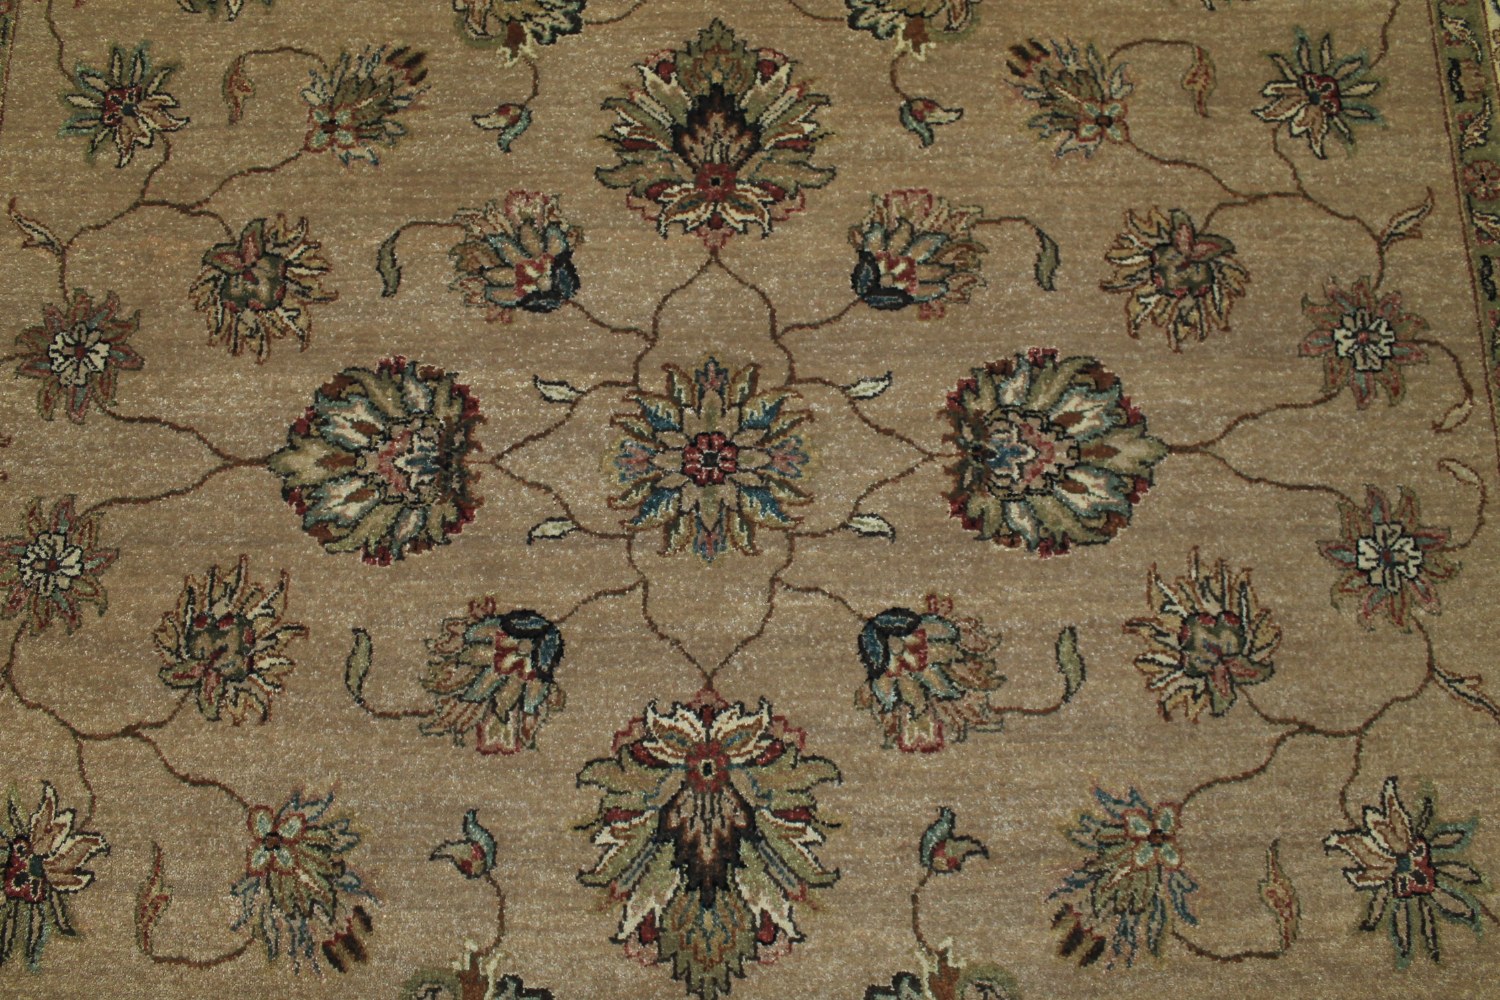 8x10 Traditional Hand Knotted Wool Area Rug - MR7998